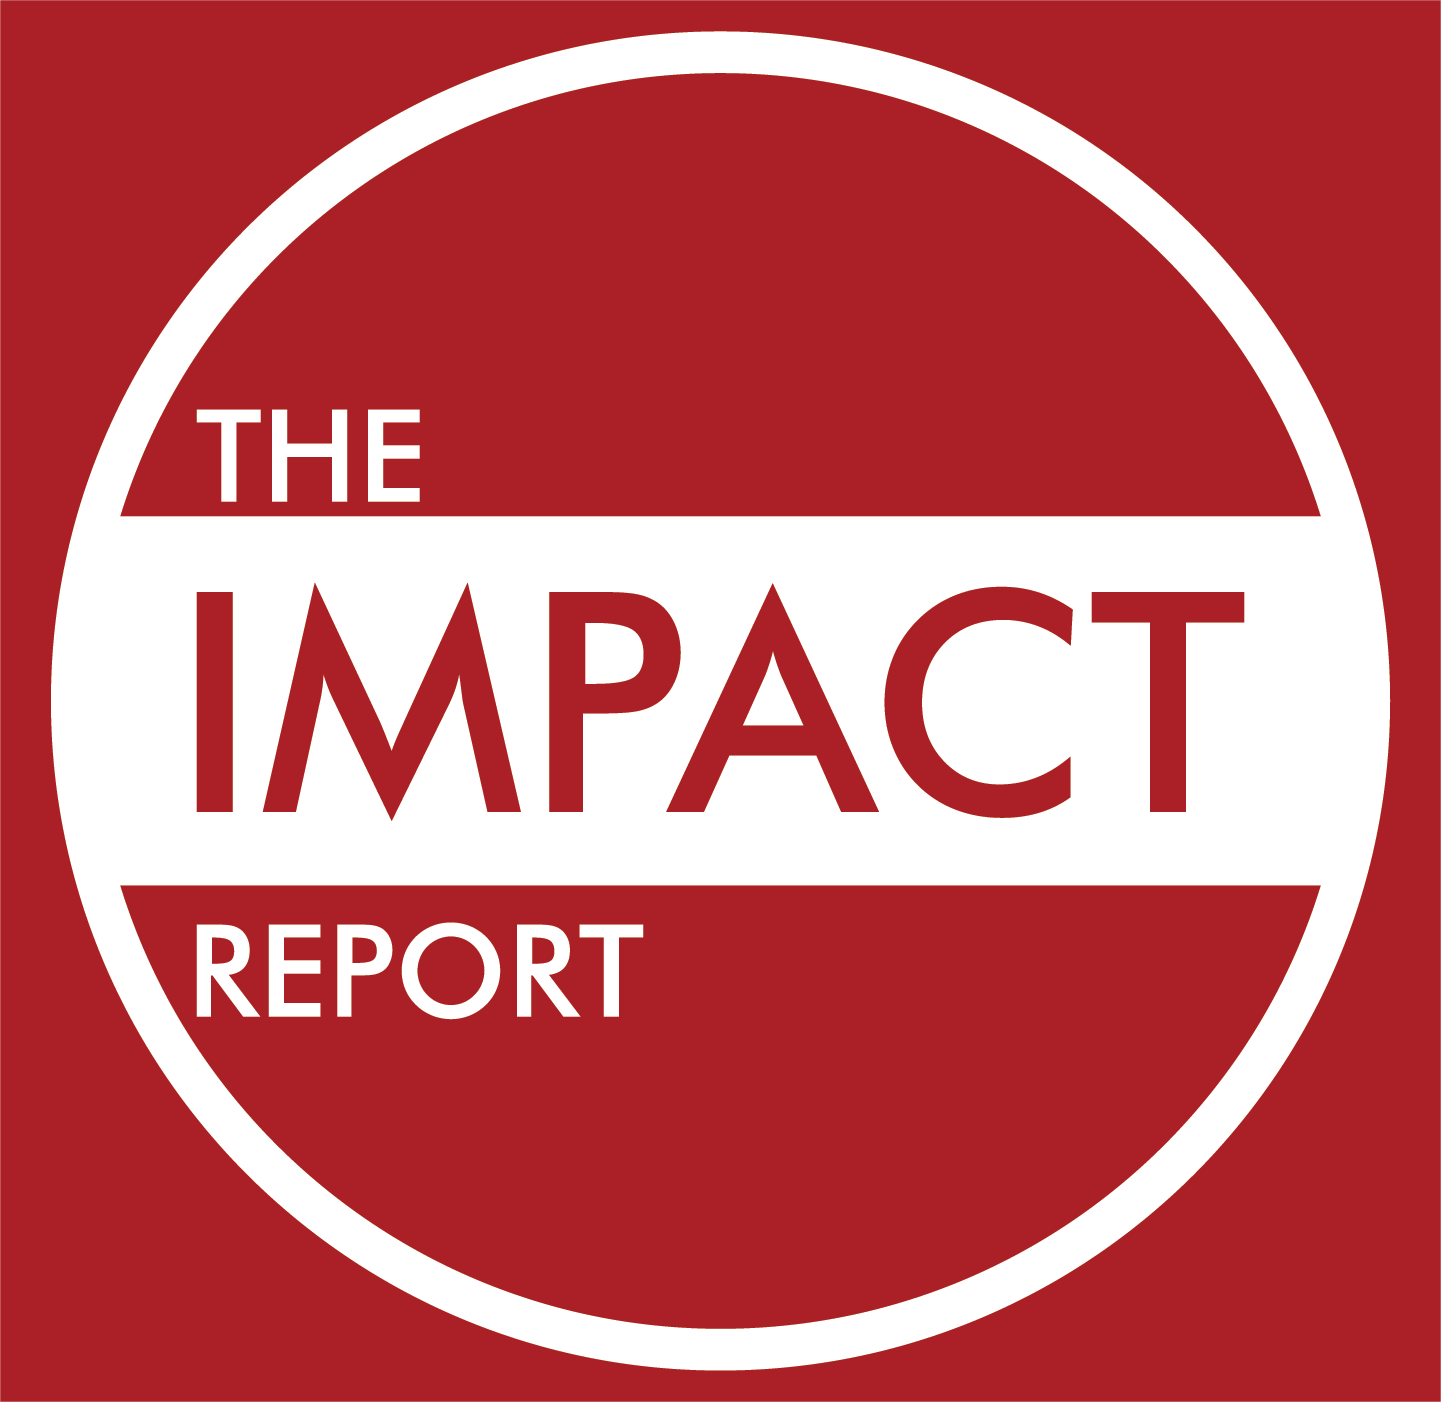 S a Red Square Logo - The Impact Report